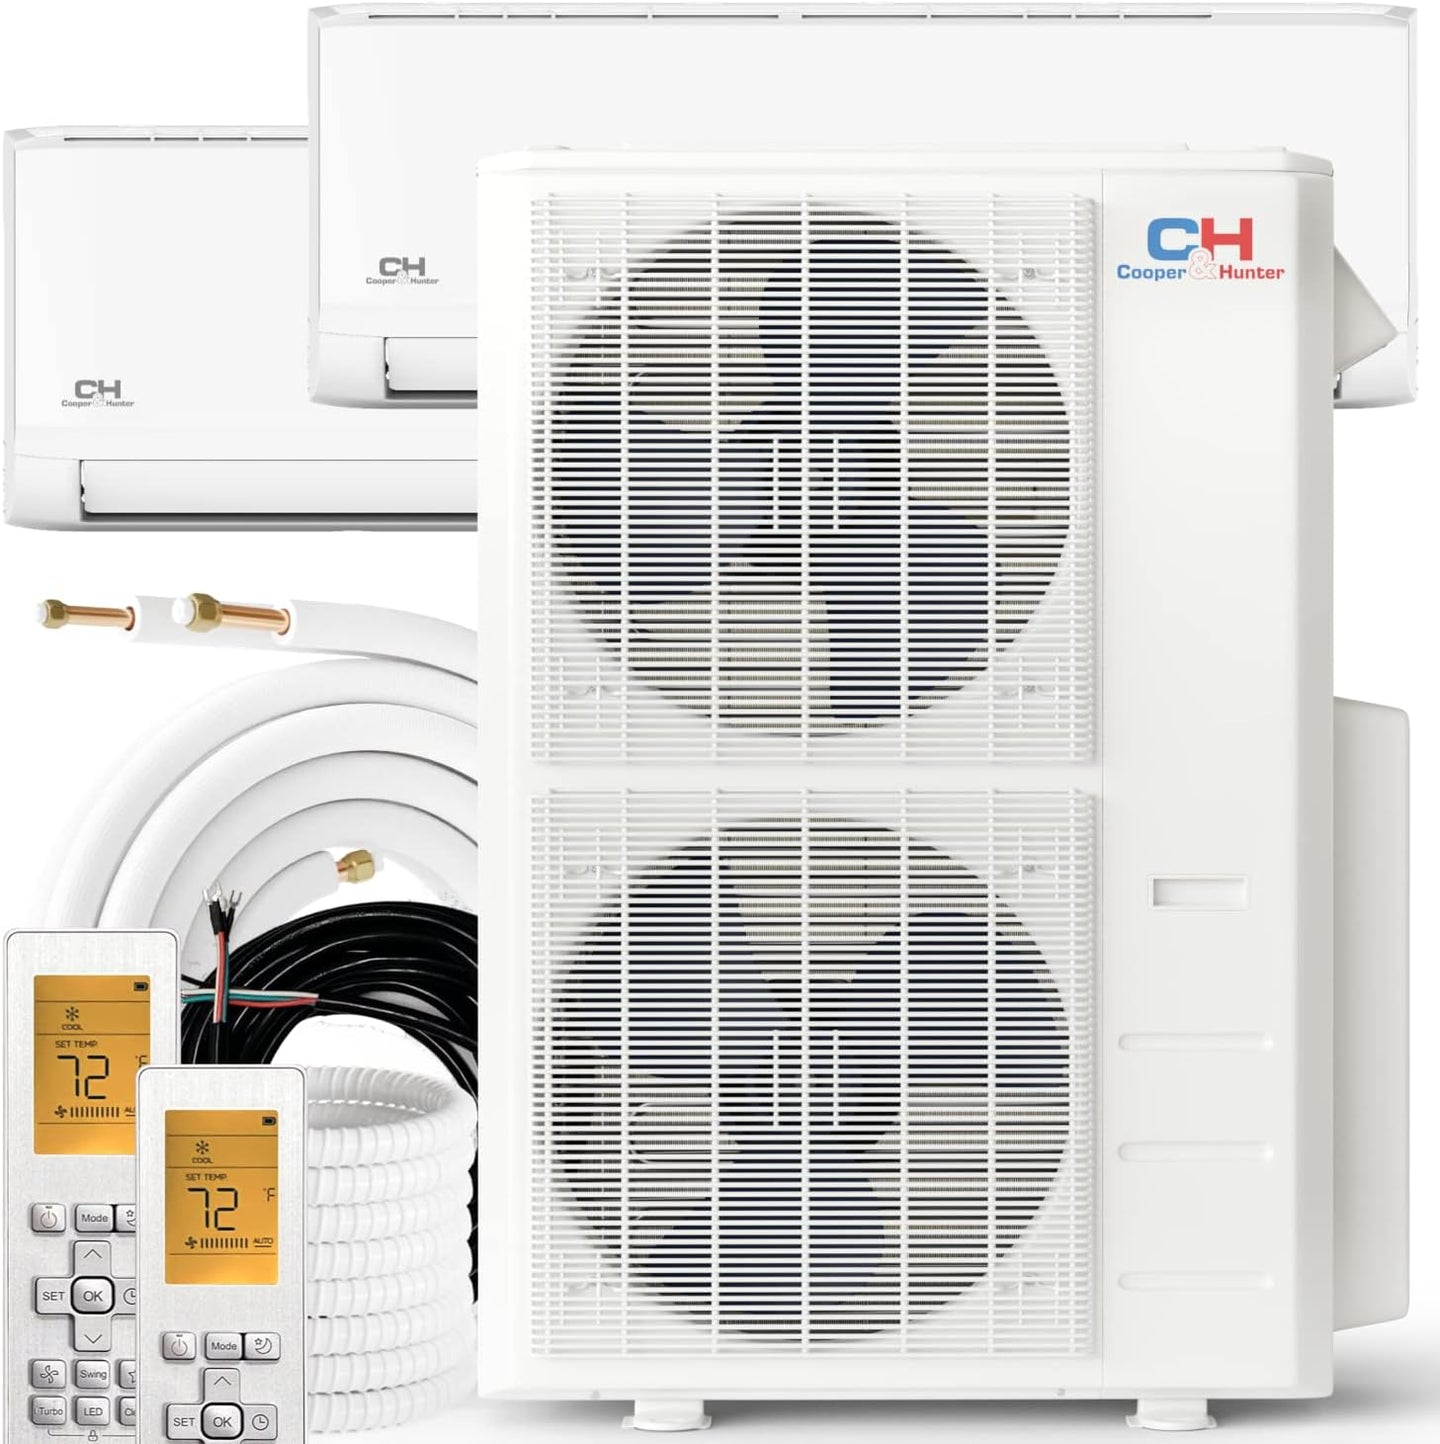 Cooper & Hunter Dual 2 Zone 48,000 BTU, 24.4 SEER2, 24,000 + 24,000 BTU Wall Mount Ductless Mini Split Heat Pump Air Conditioner System with 25Ft Installation Kits